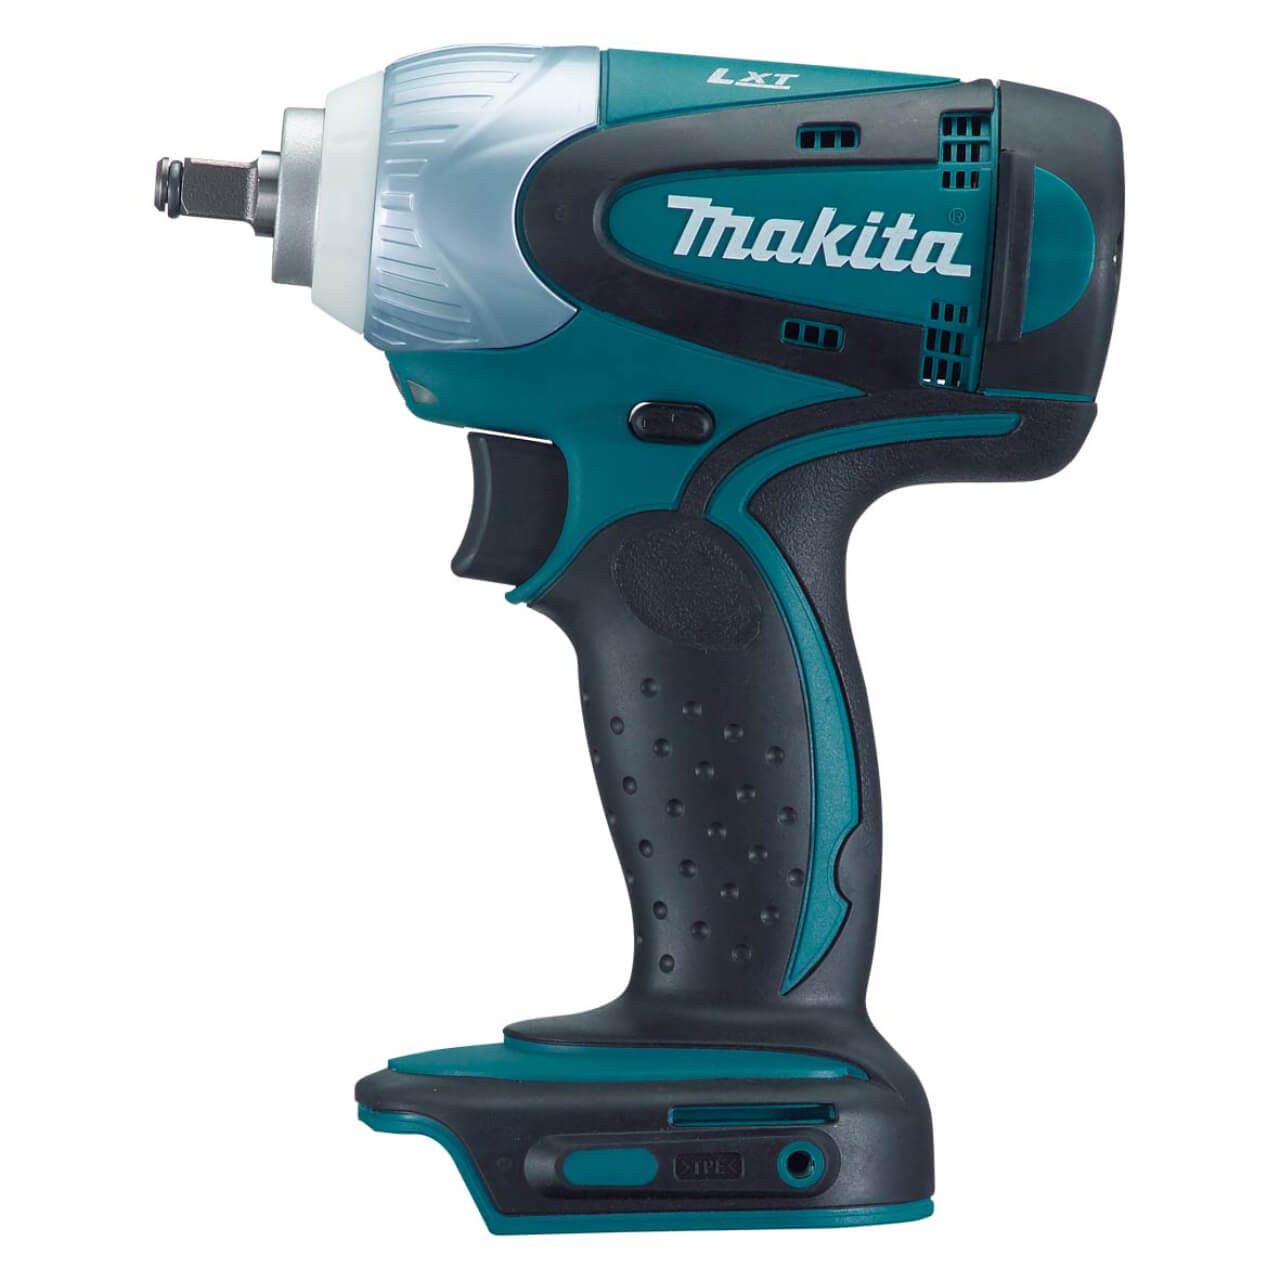 Makita 18V 3/8” Impact Wrench - Tool Only